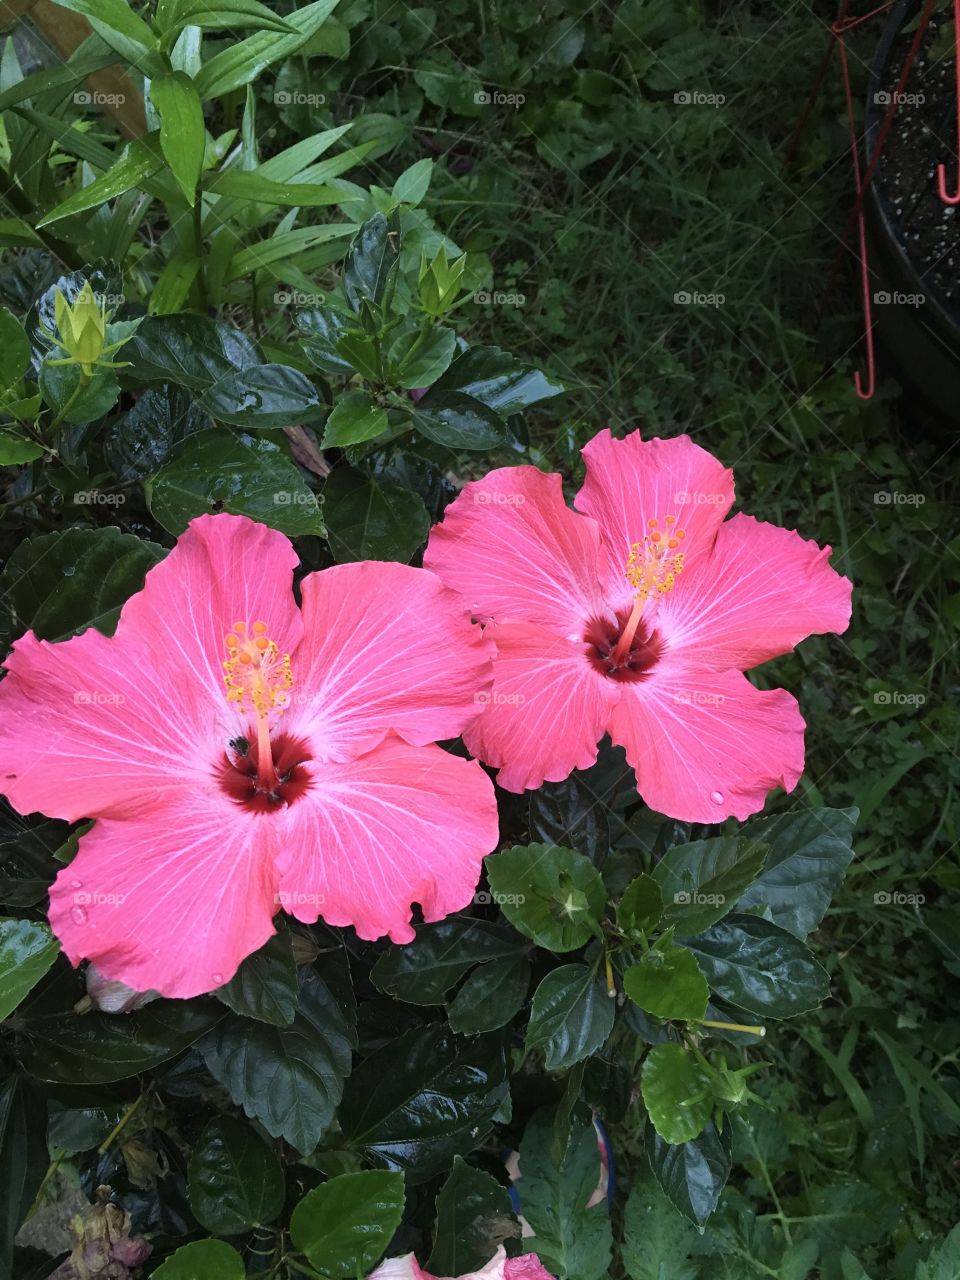 Hibiscus side by side :)